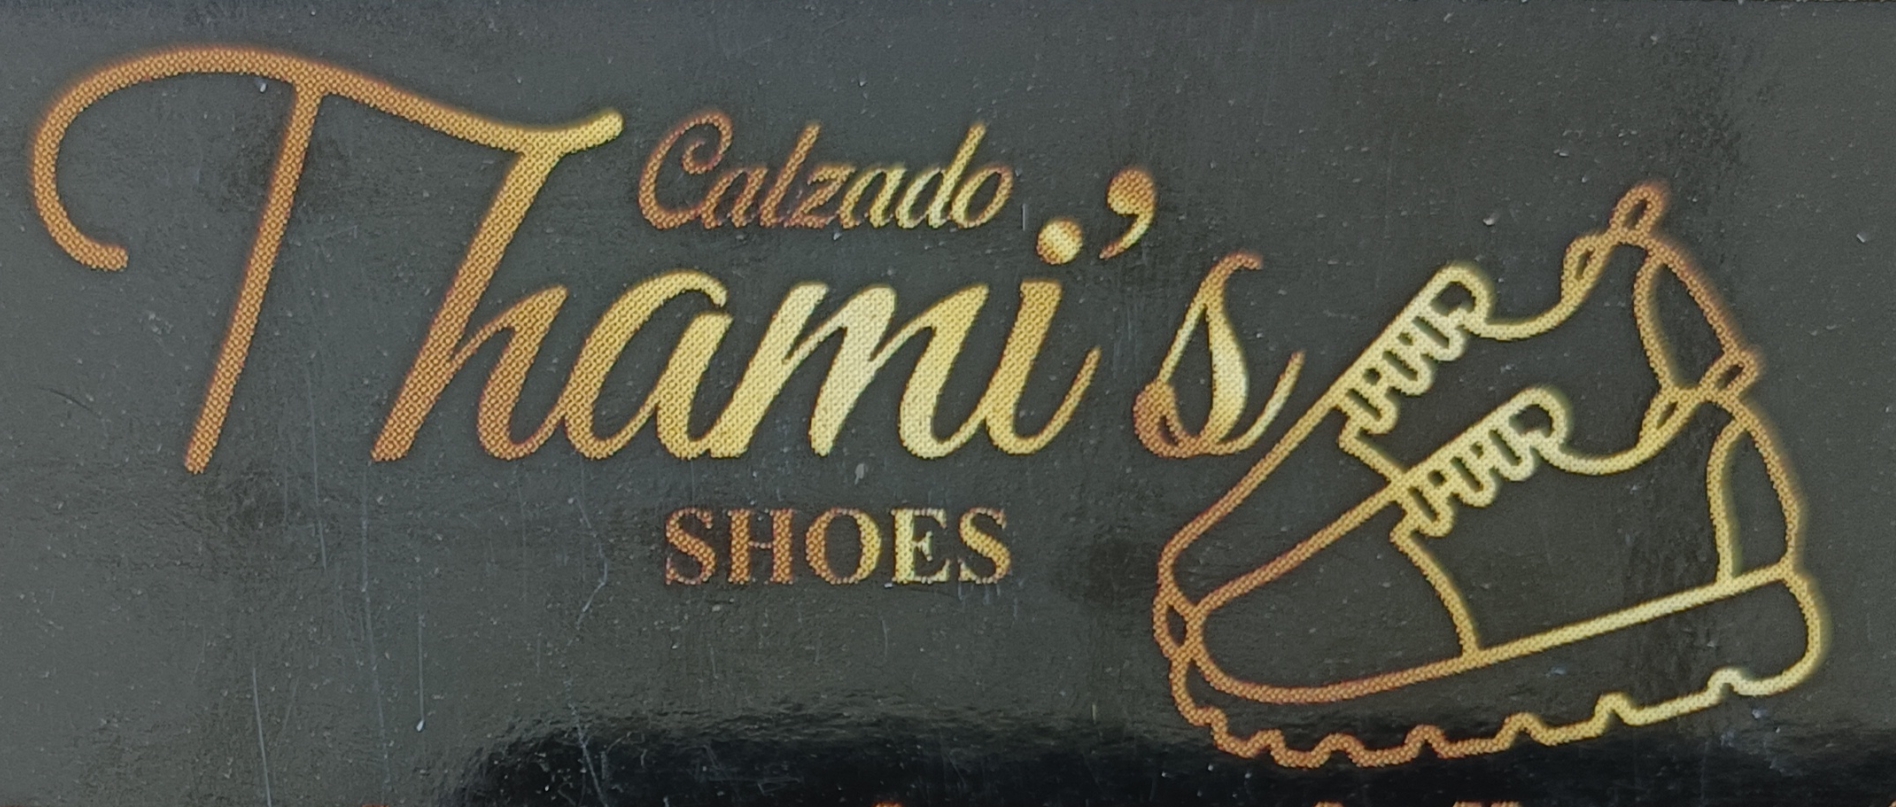 Thamis Shoes